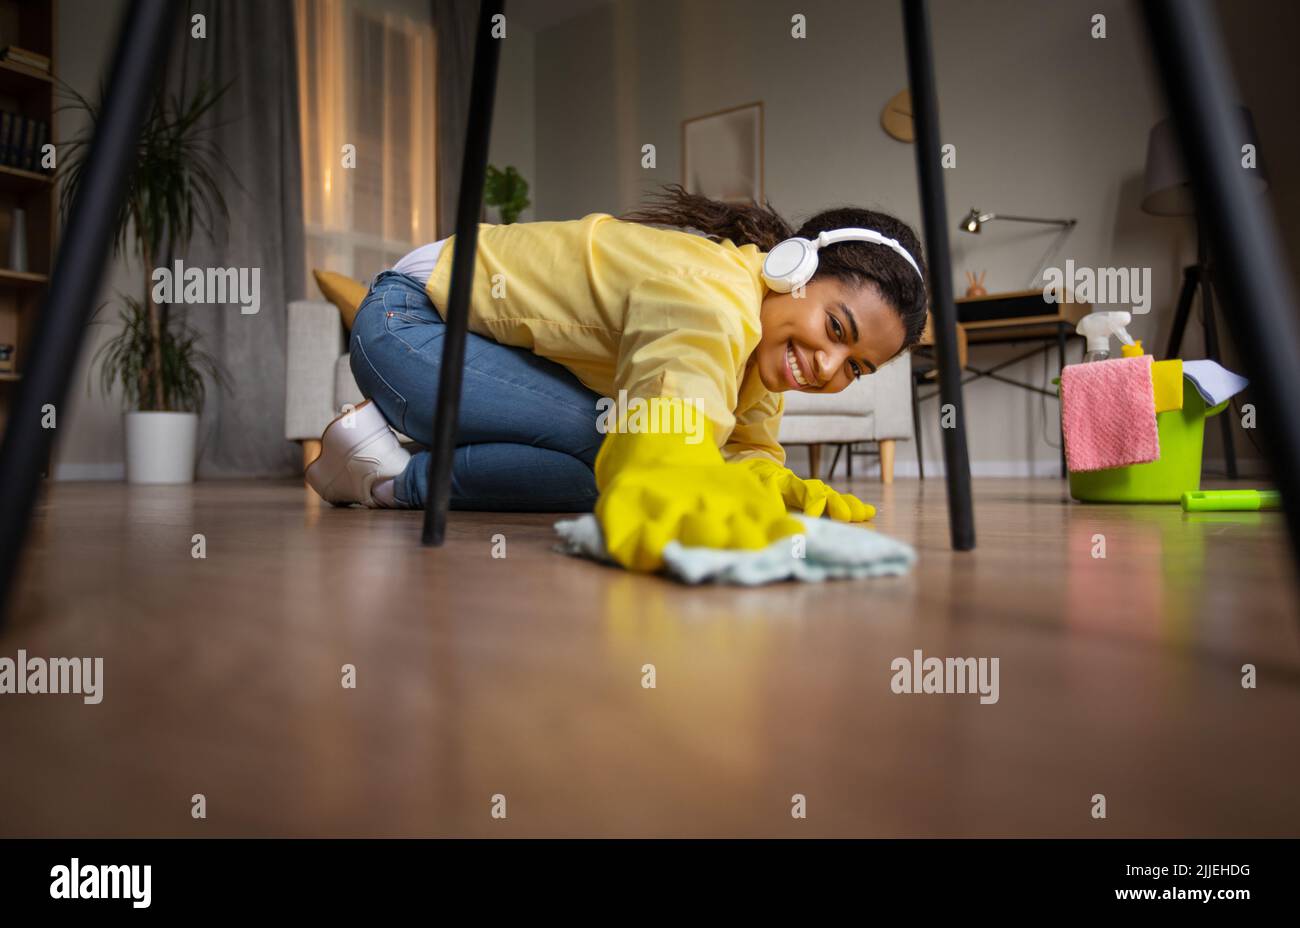 Black Lady Dusting And Mopping Floor With Rag At Home Stock Photo